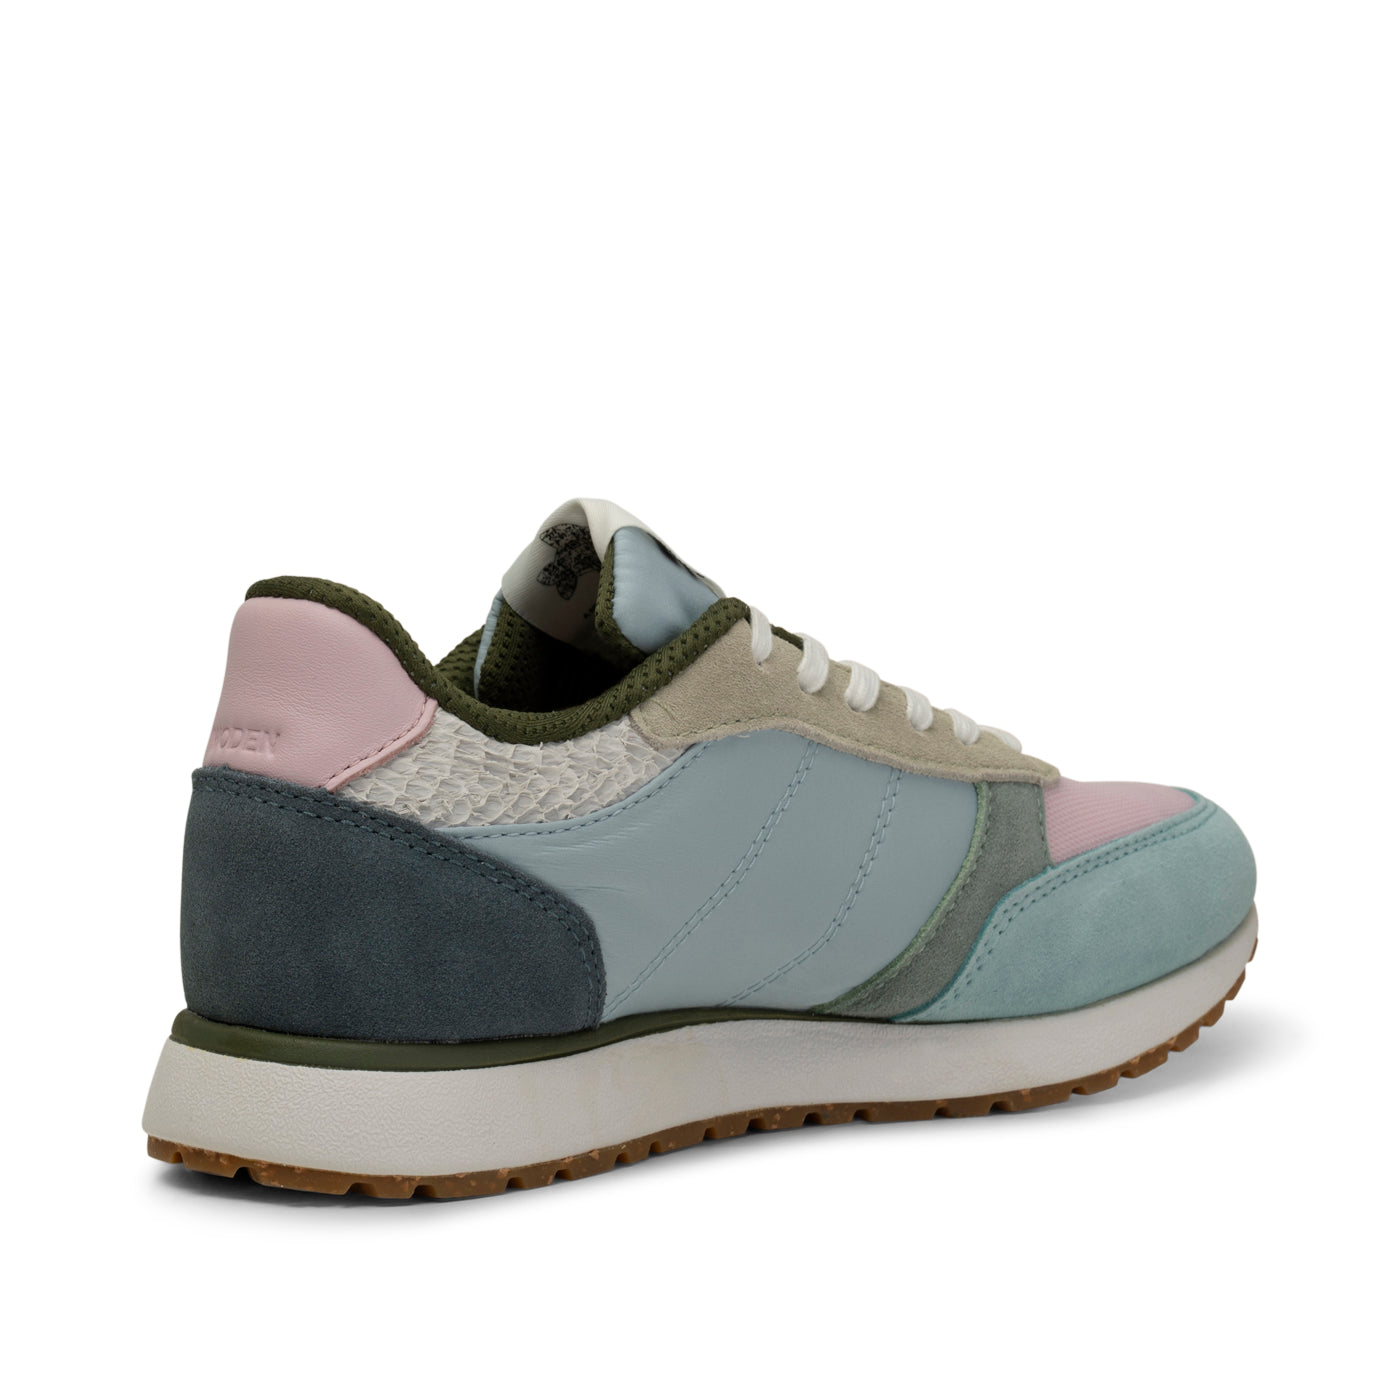 Ronja - Ice Blue Multi • Buy online at WODEN